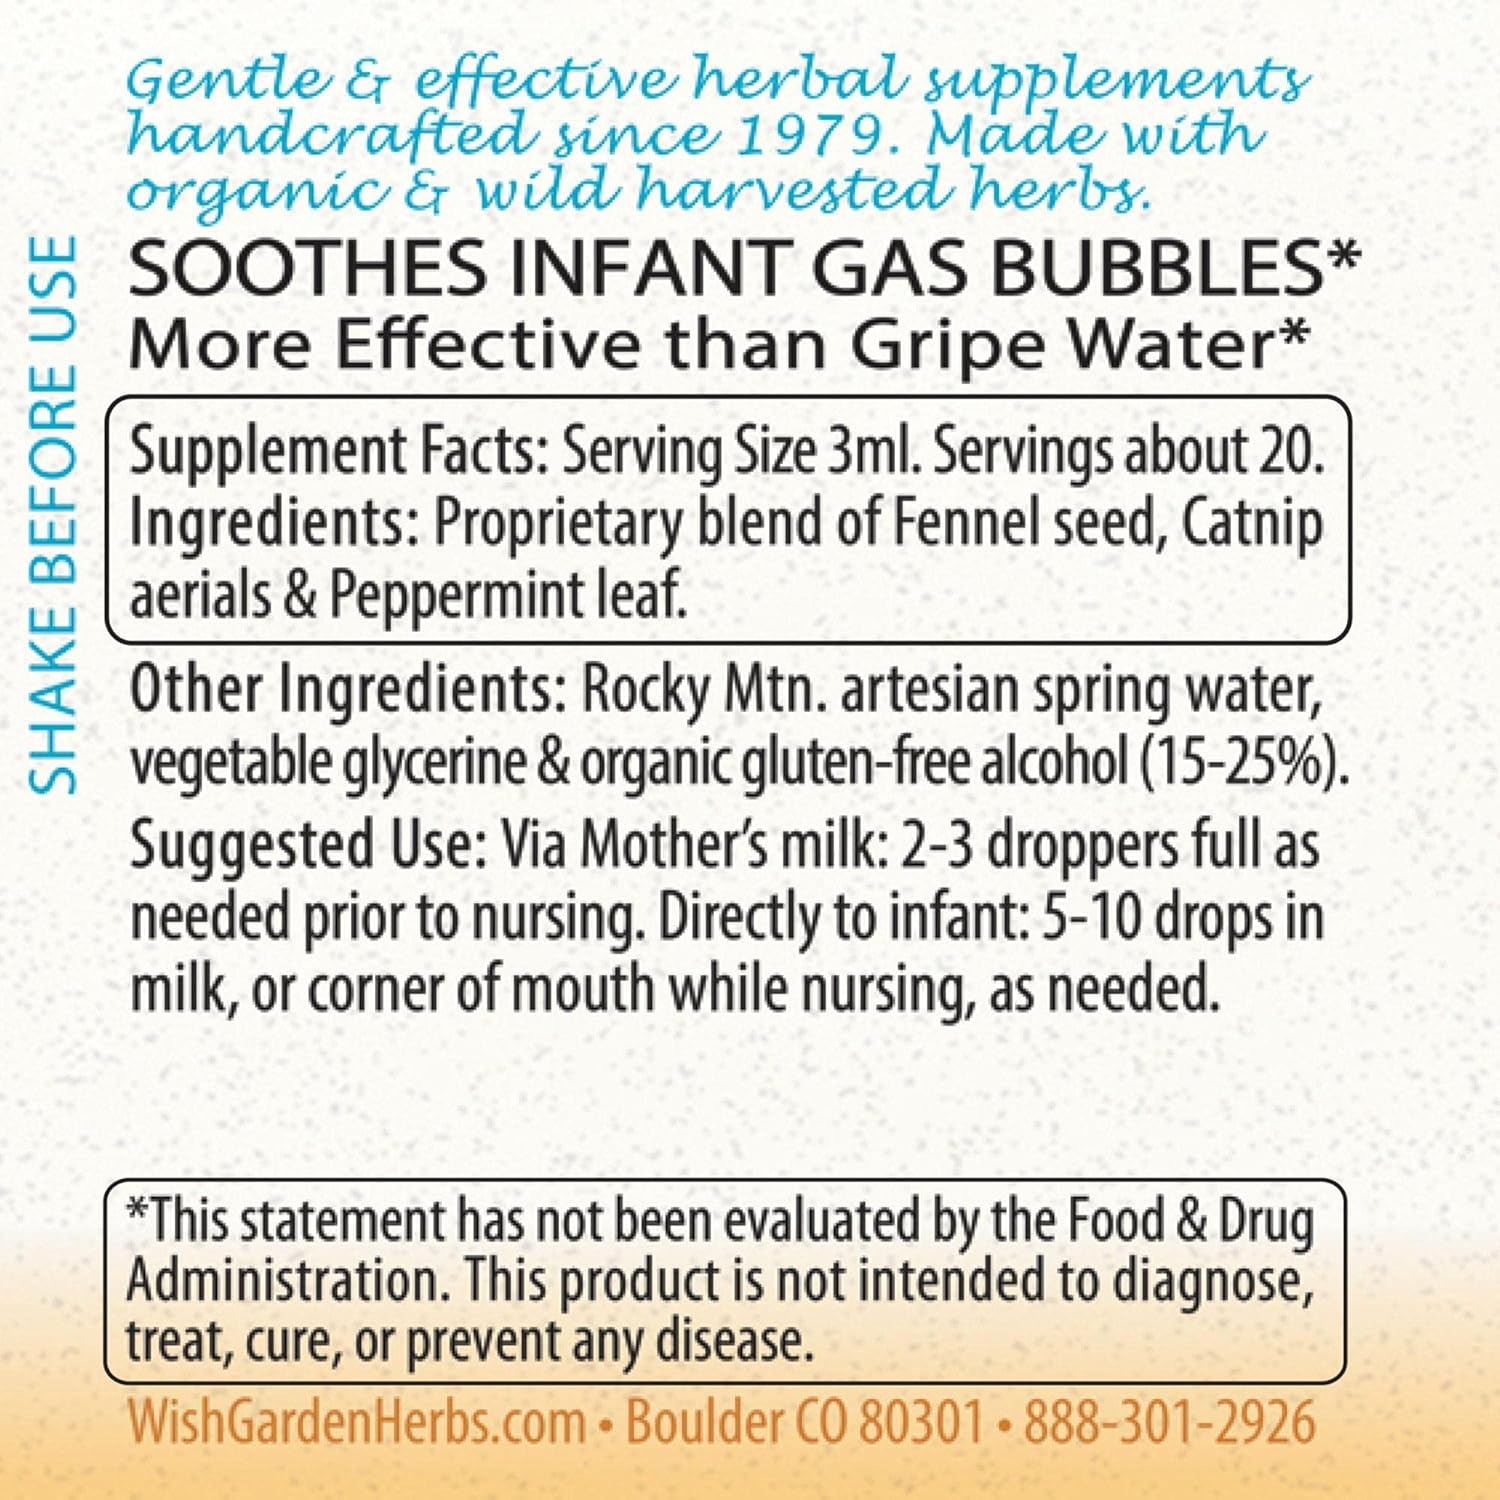 WishGarden Herbs Colic Ease for Infants - Natural Herbal Colic Relief for Newborns, Infant Gas Relief Drops Soothes Baby Gas Bubbles Quickly, More Effective Than Gripe Water for Infants, 2oz Drops